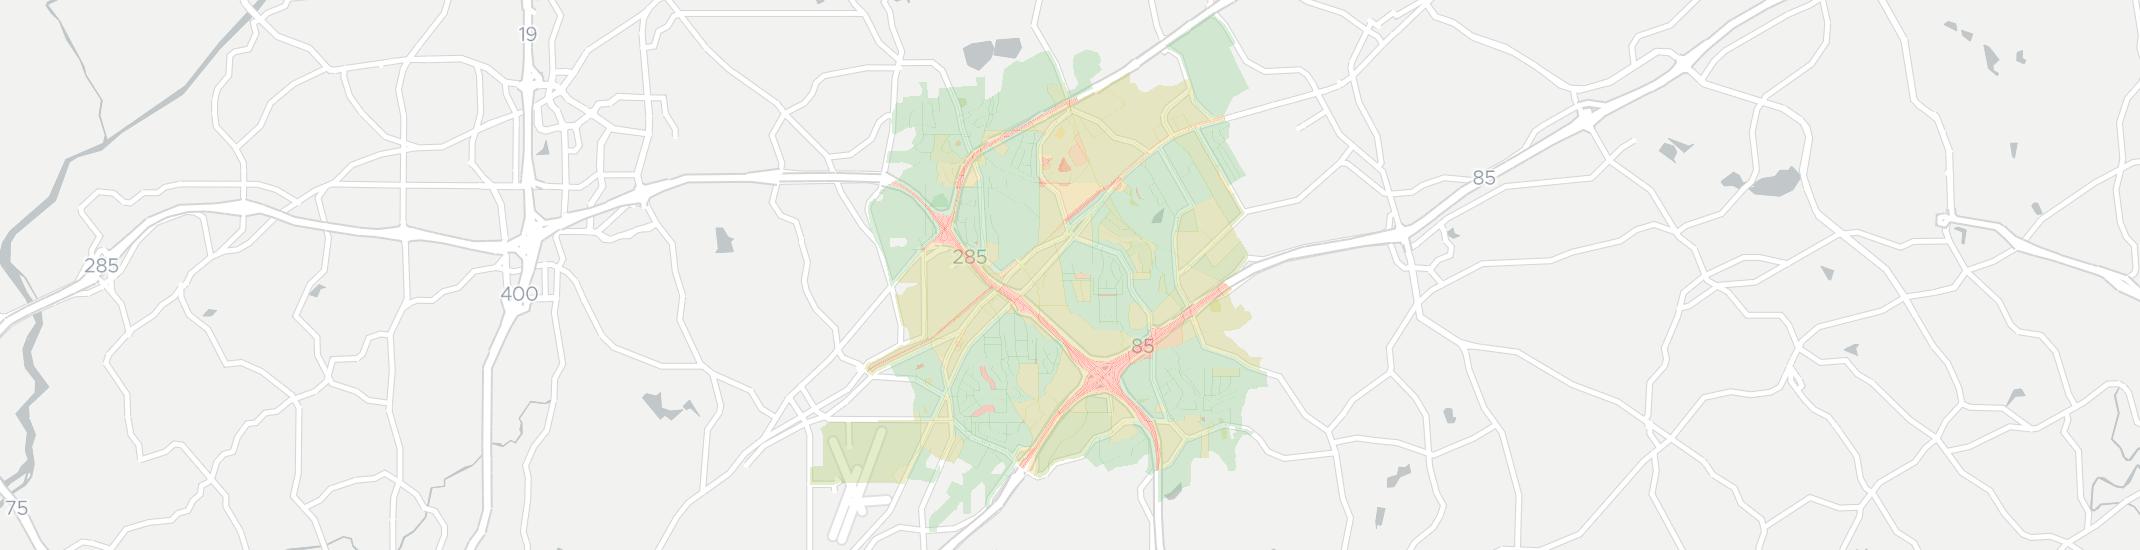 Doraville Internet Competition Map. Click for interactive map.